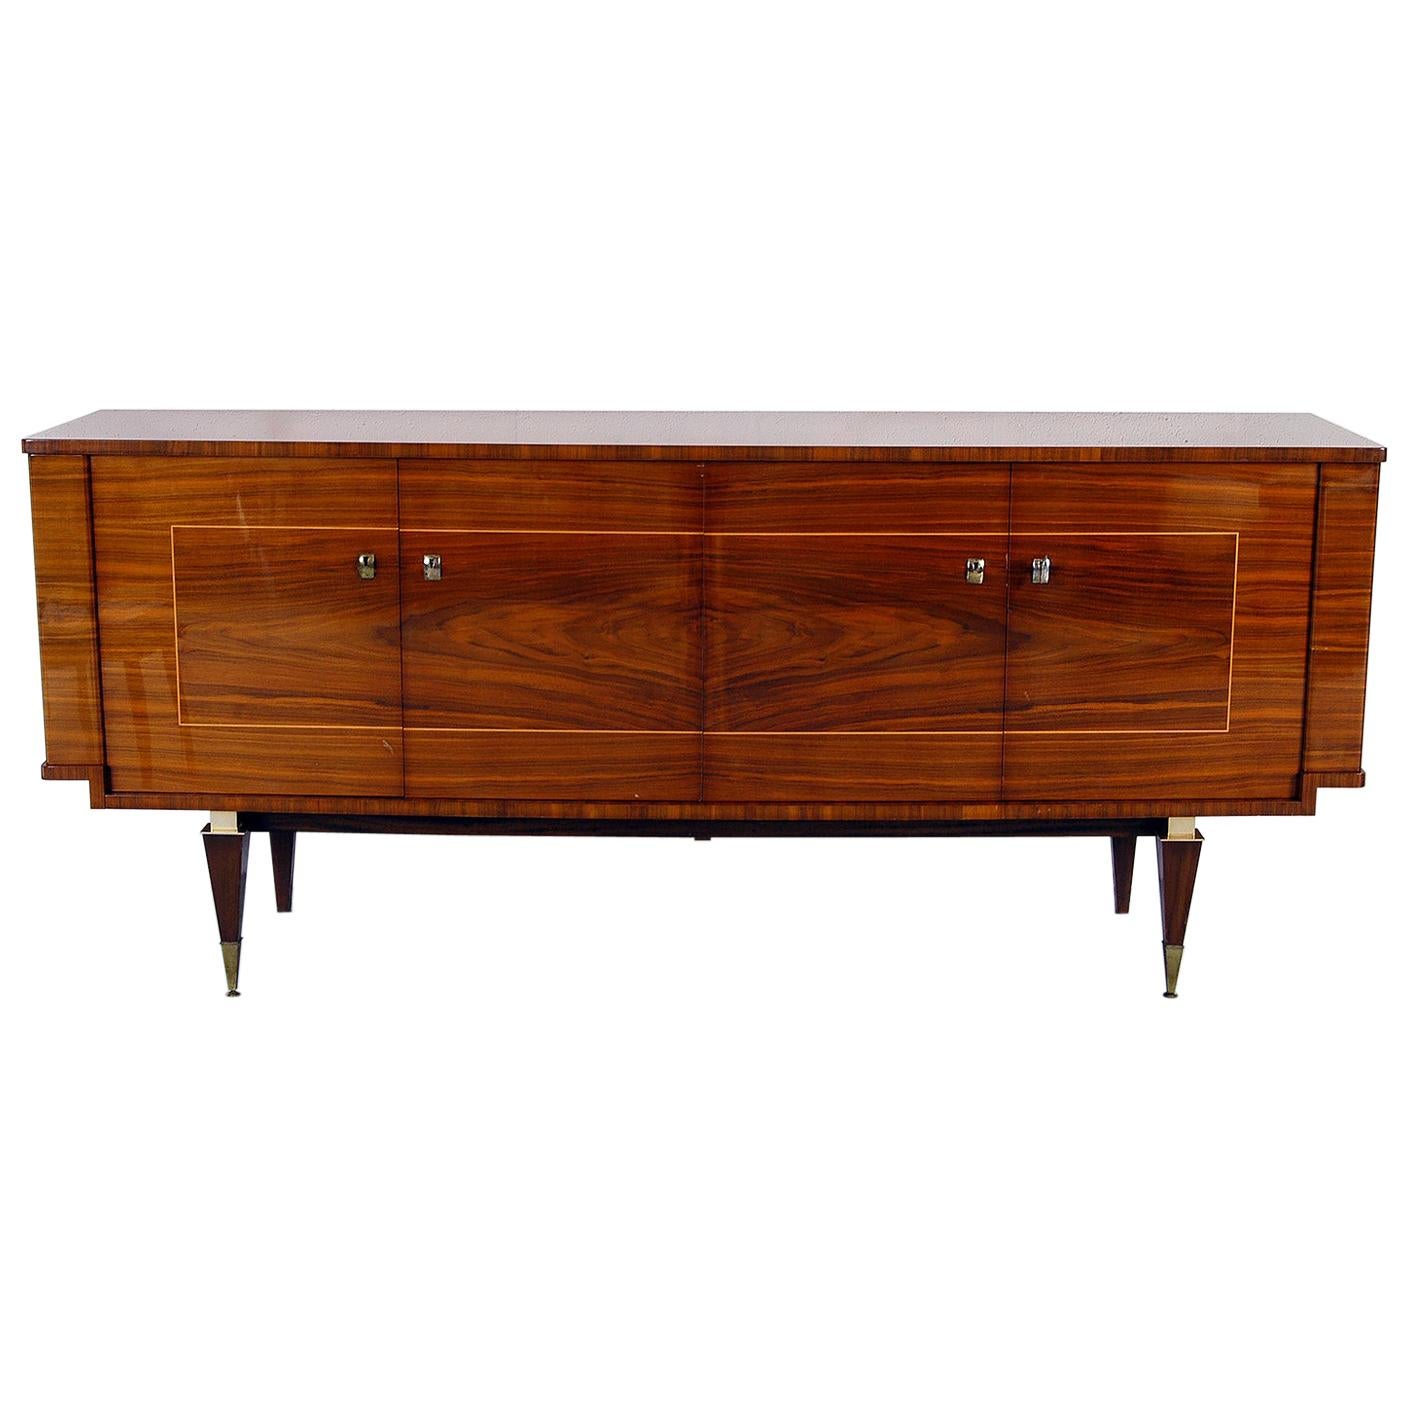 1950s French Midcentury Bowfront Sideboard in Lacquered Birch Boxwood Hardwood